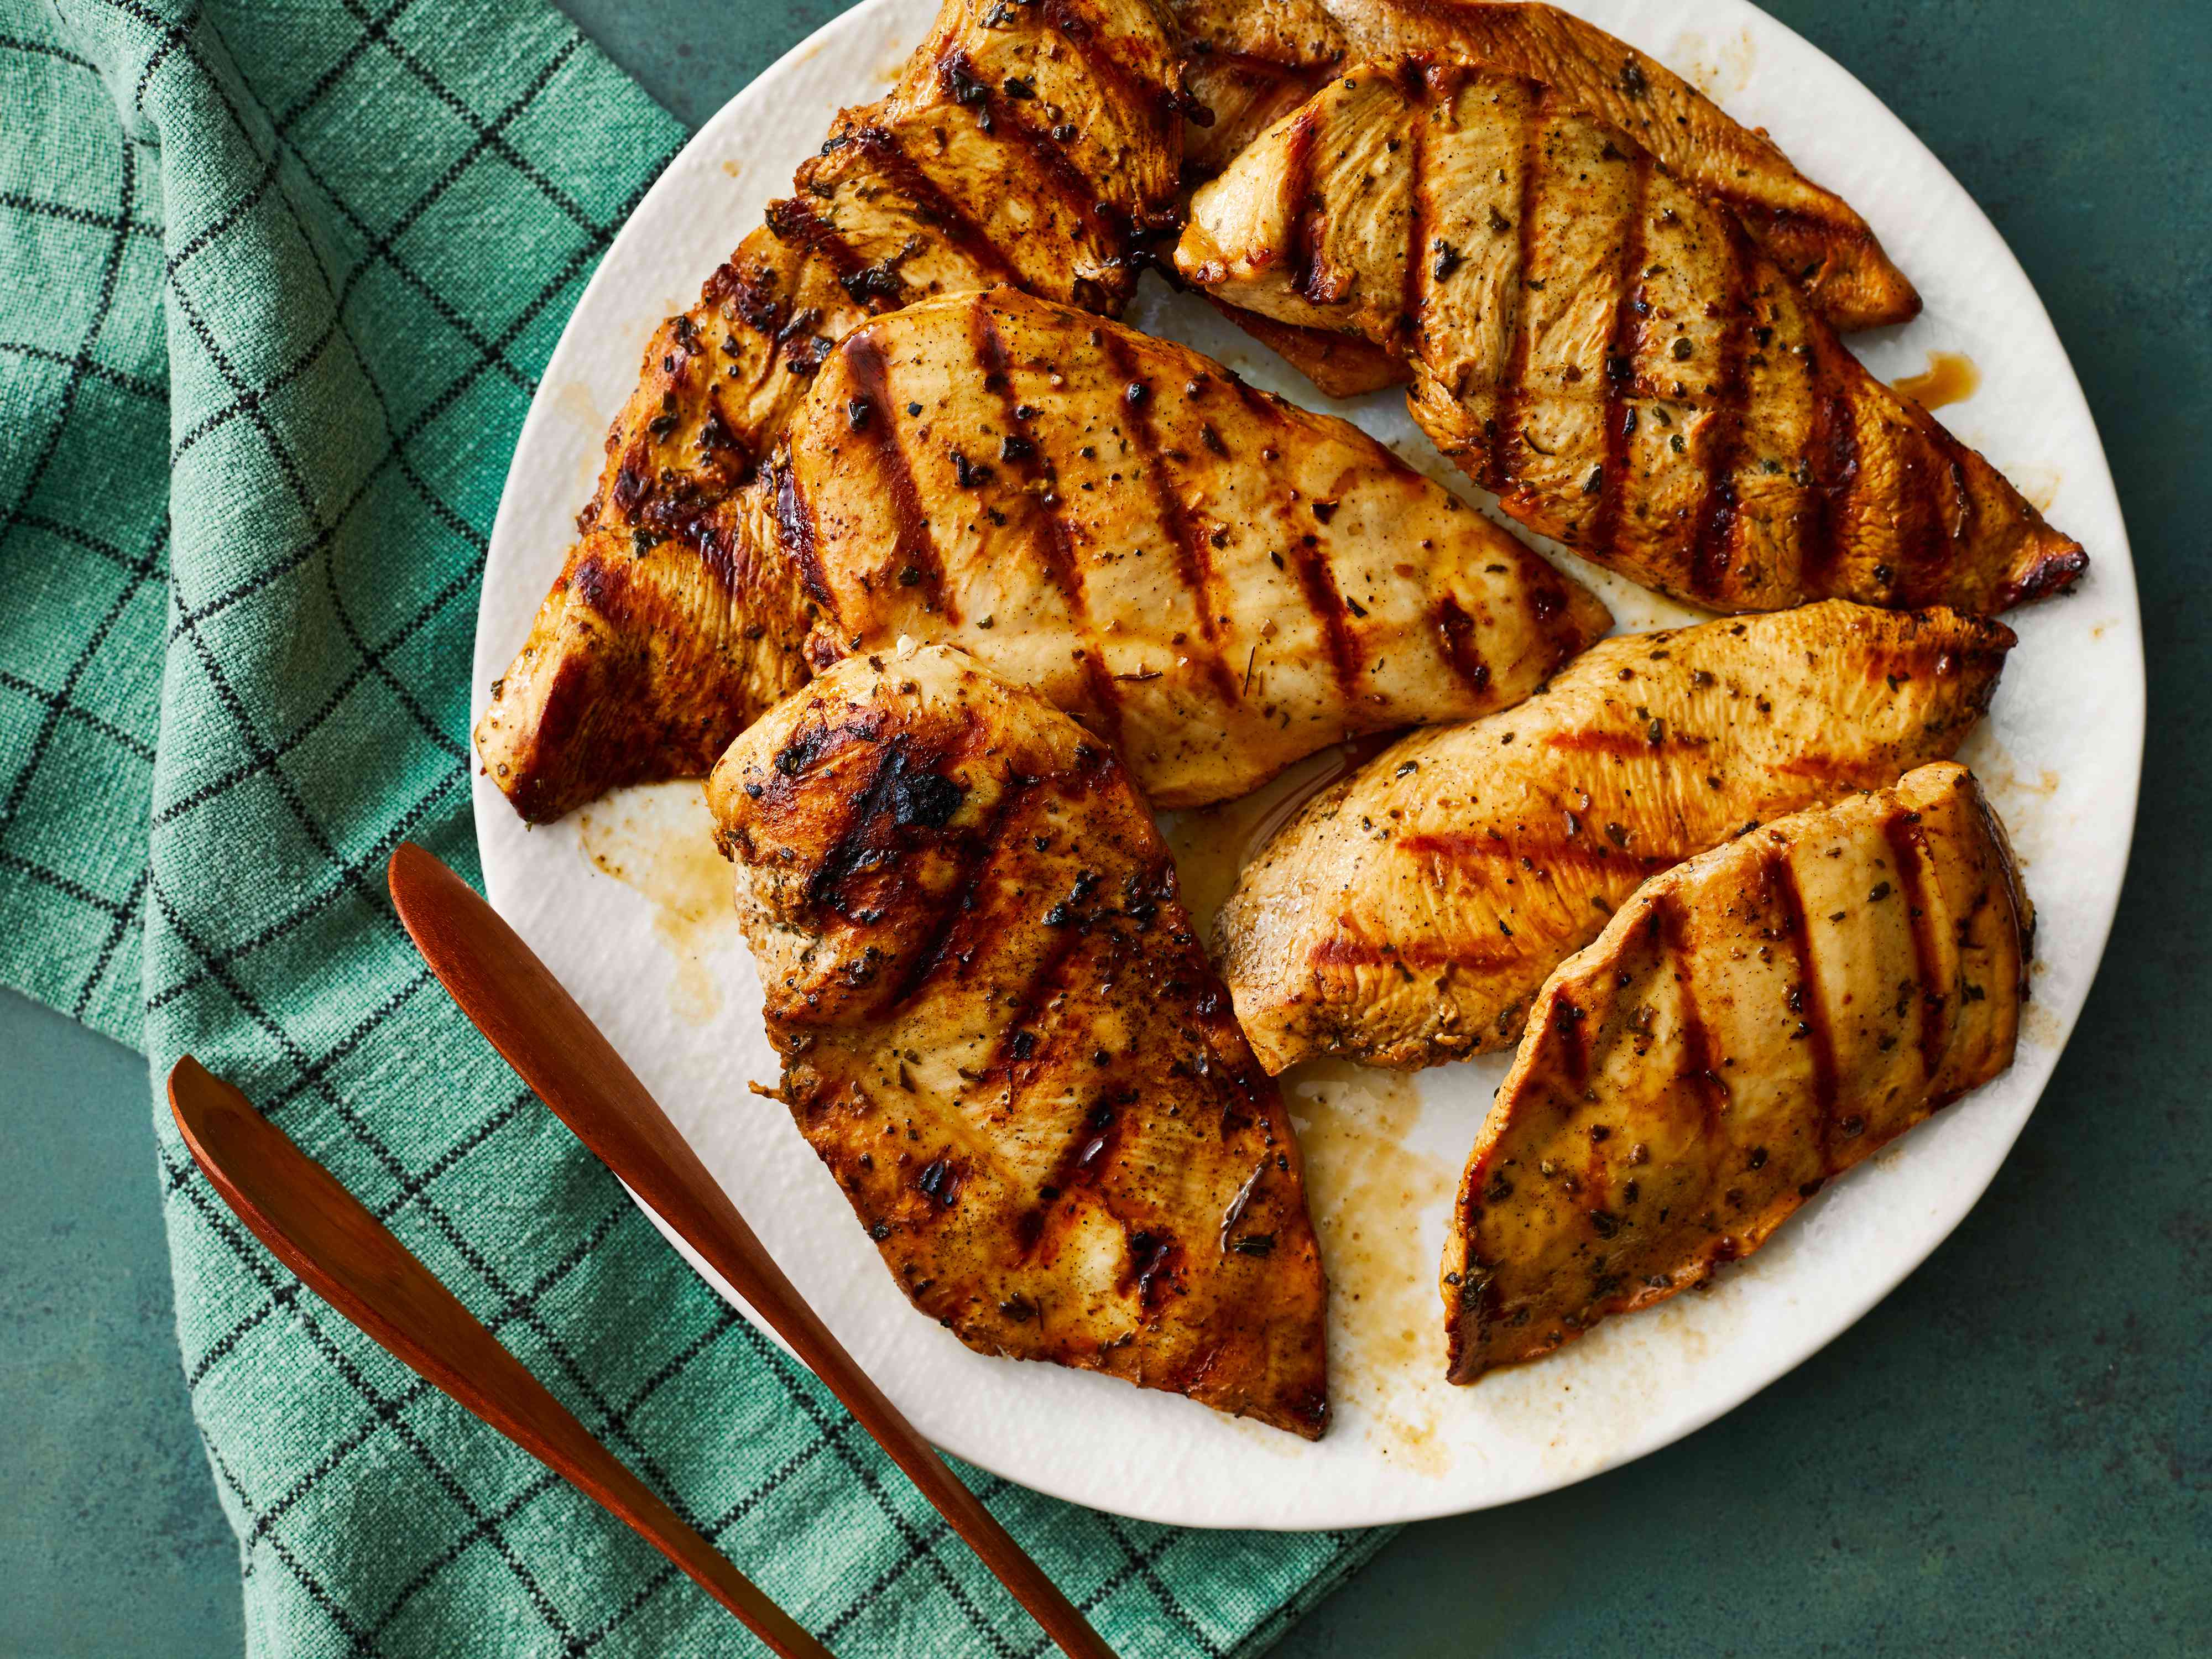 Don’t Grill Your Chicken Without Doing This First